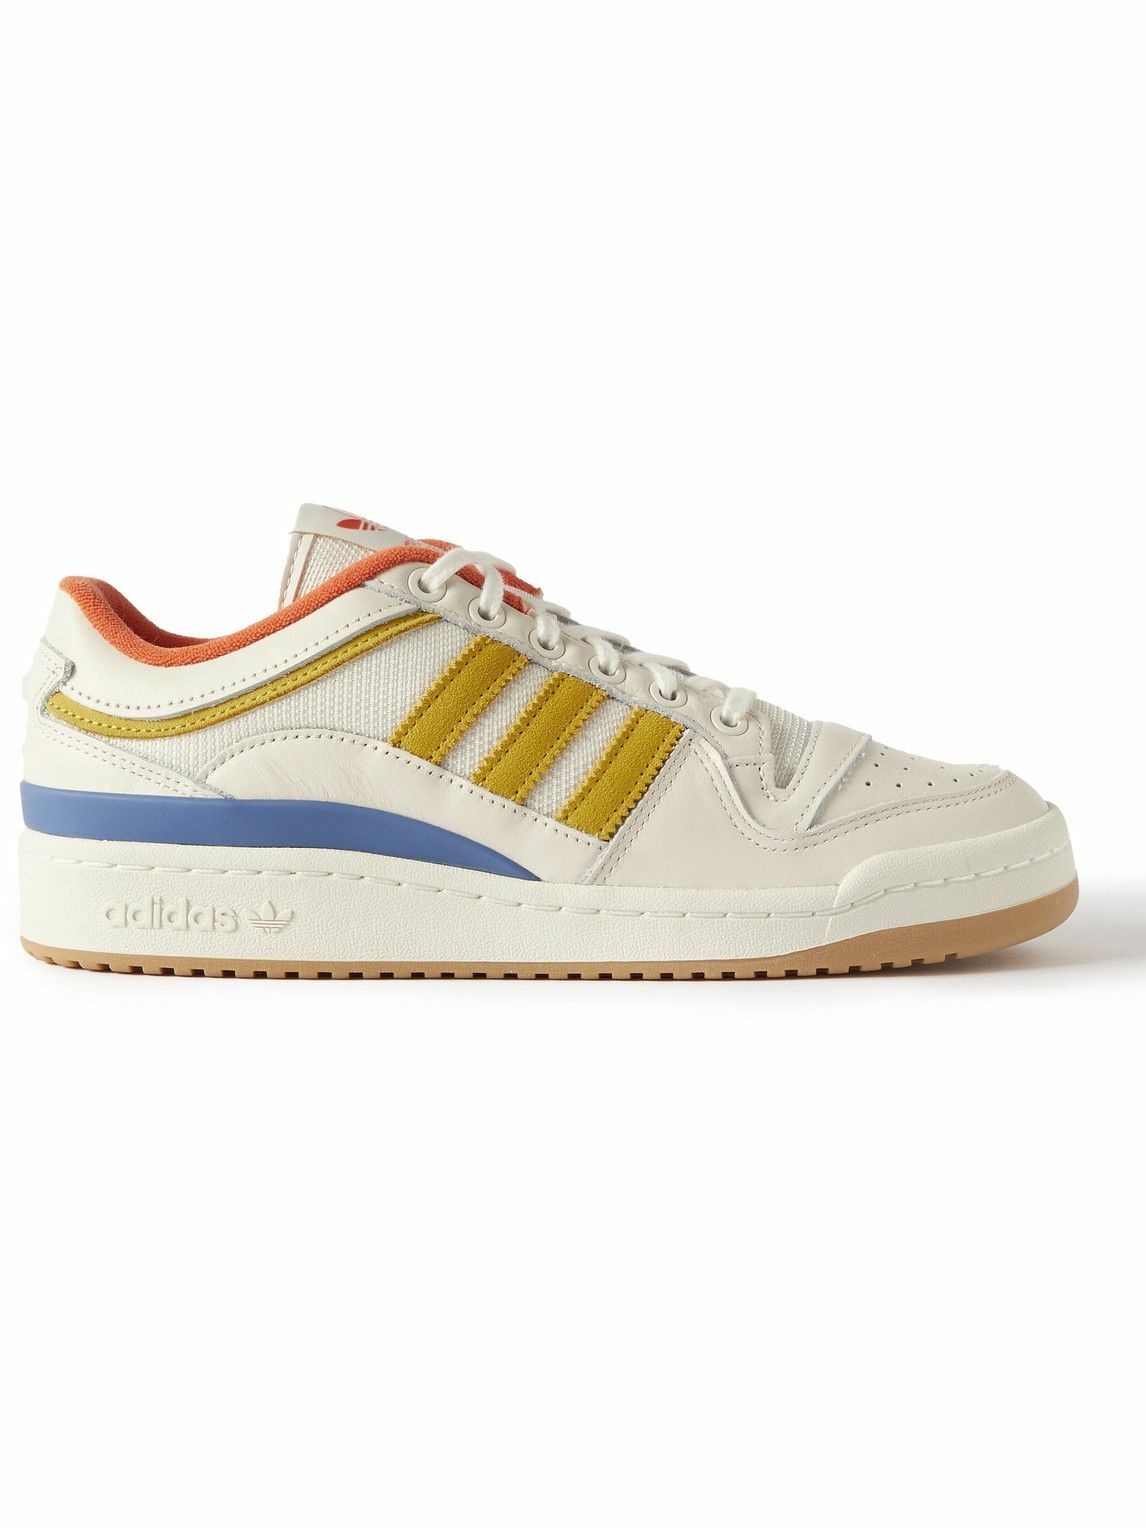 Photo: adidas Consortium - WOOD WOOD Forum Low Leather, Mesh and Suede Sneakers - White